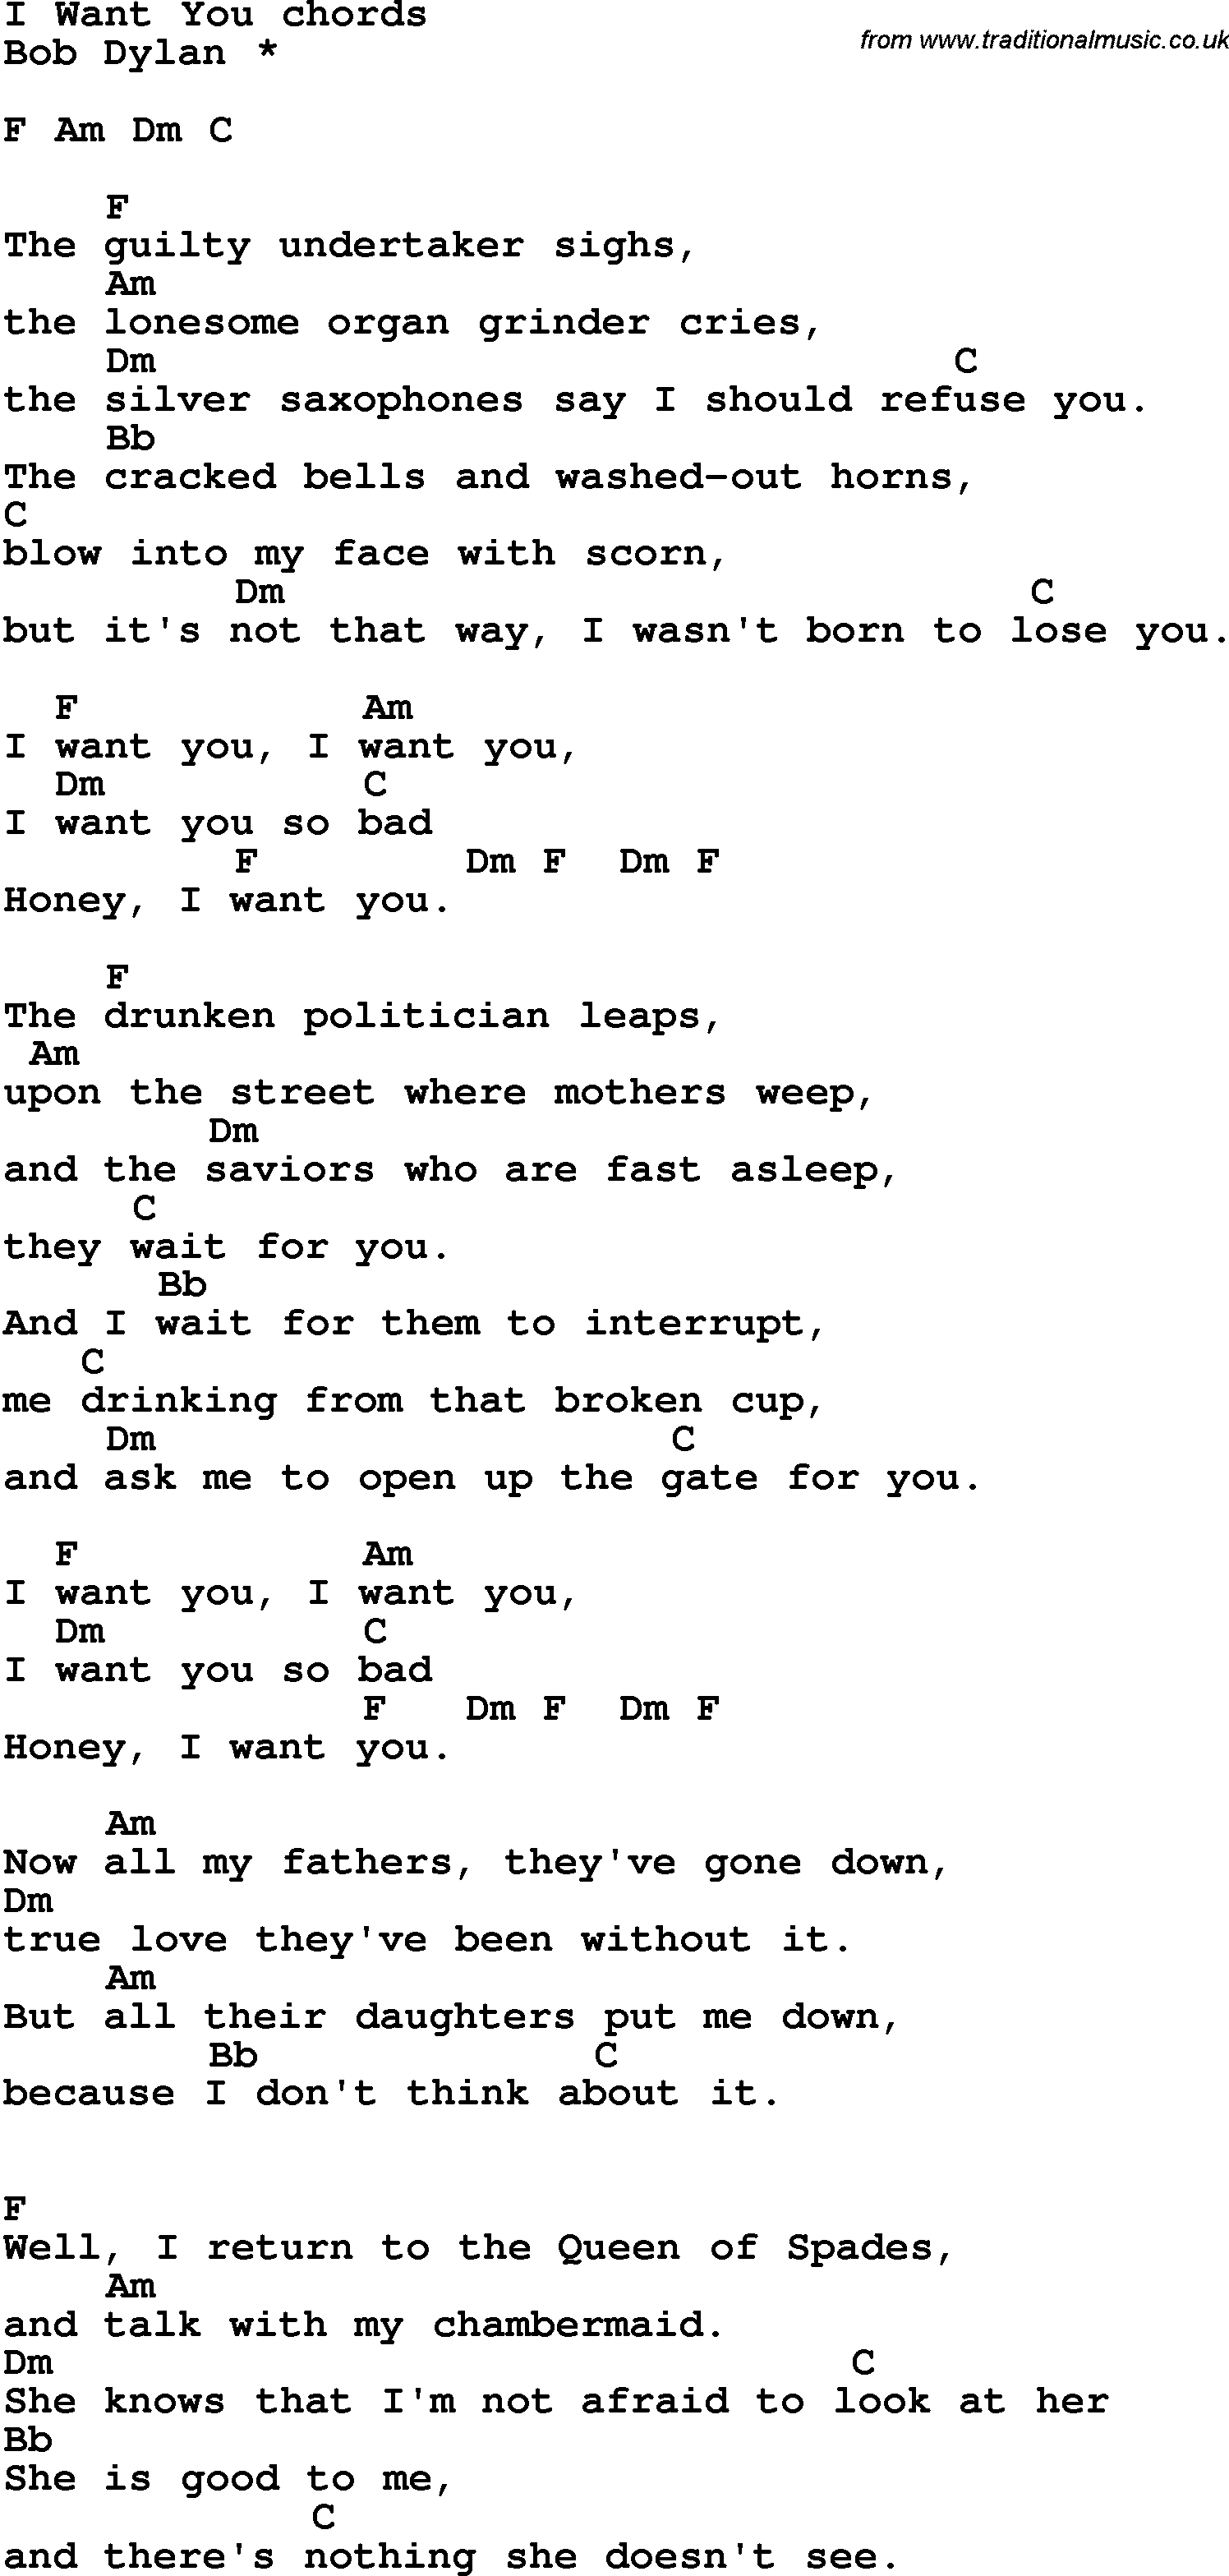 Song Lyrics with guitar chords for I Want You